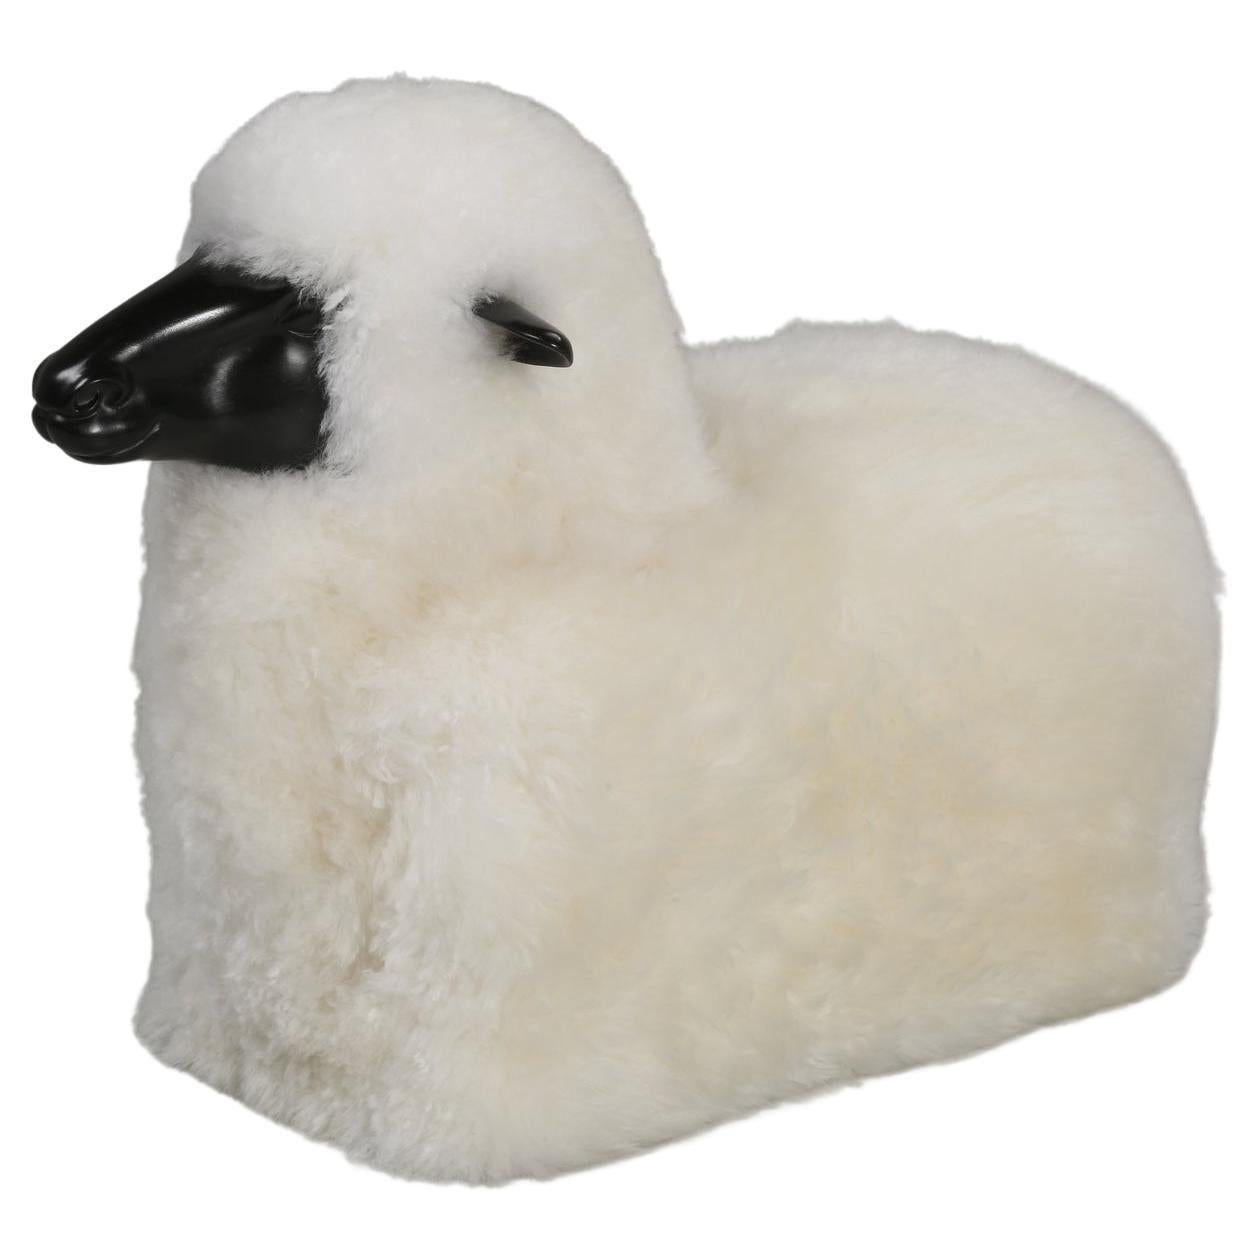 Baby Lamb Made in American by Skilled Artisans and Covered in Real Sheep Fur